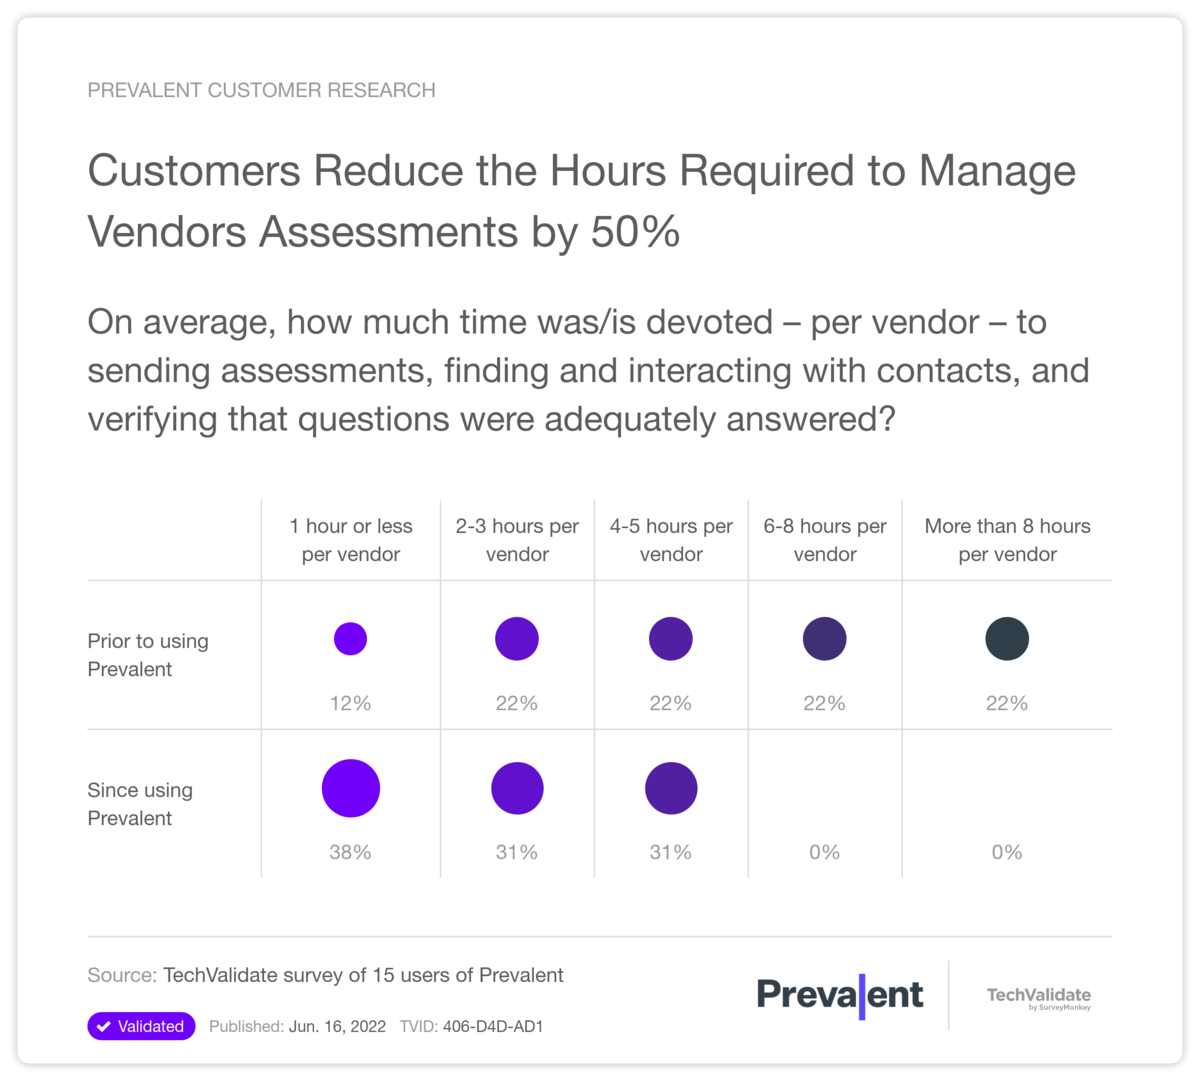 Customers Reduce the Hours Required to Manage Vendors Assessments by 50%